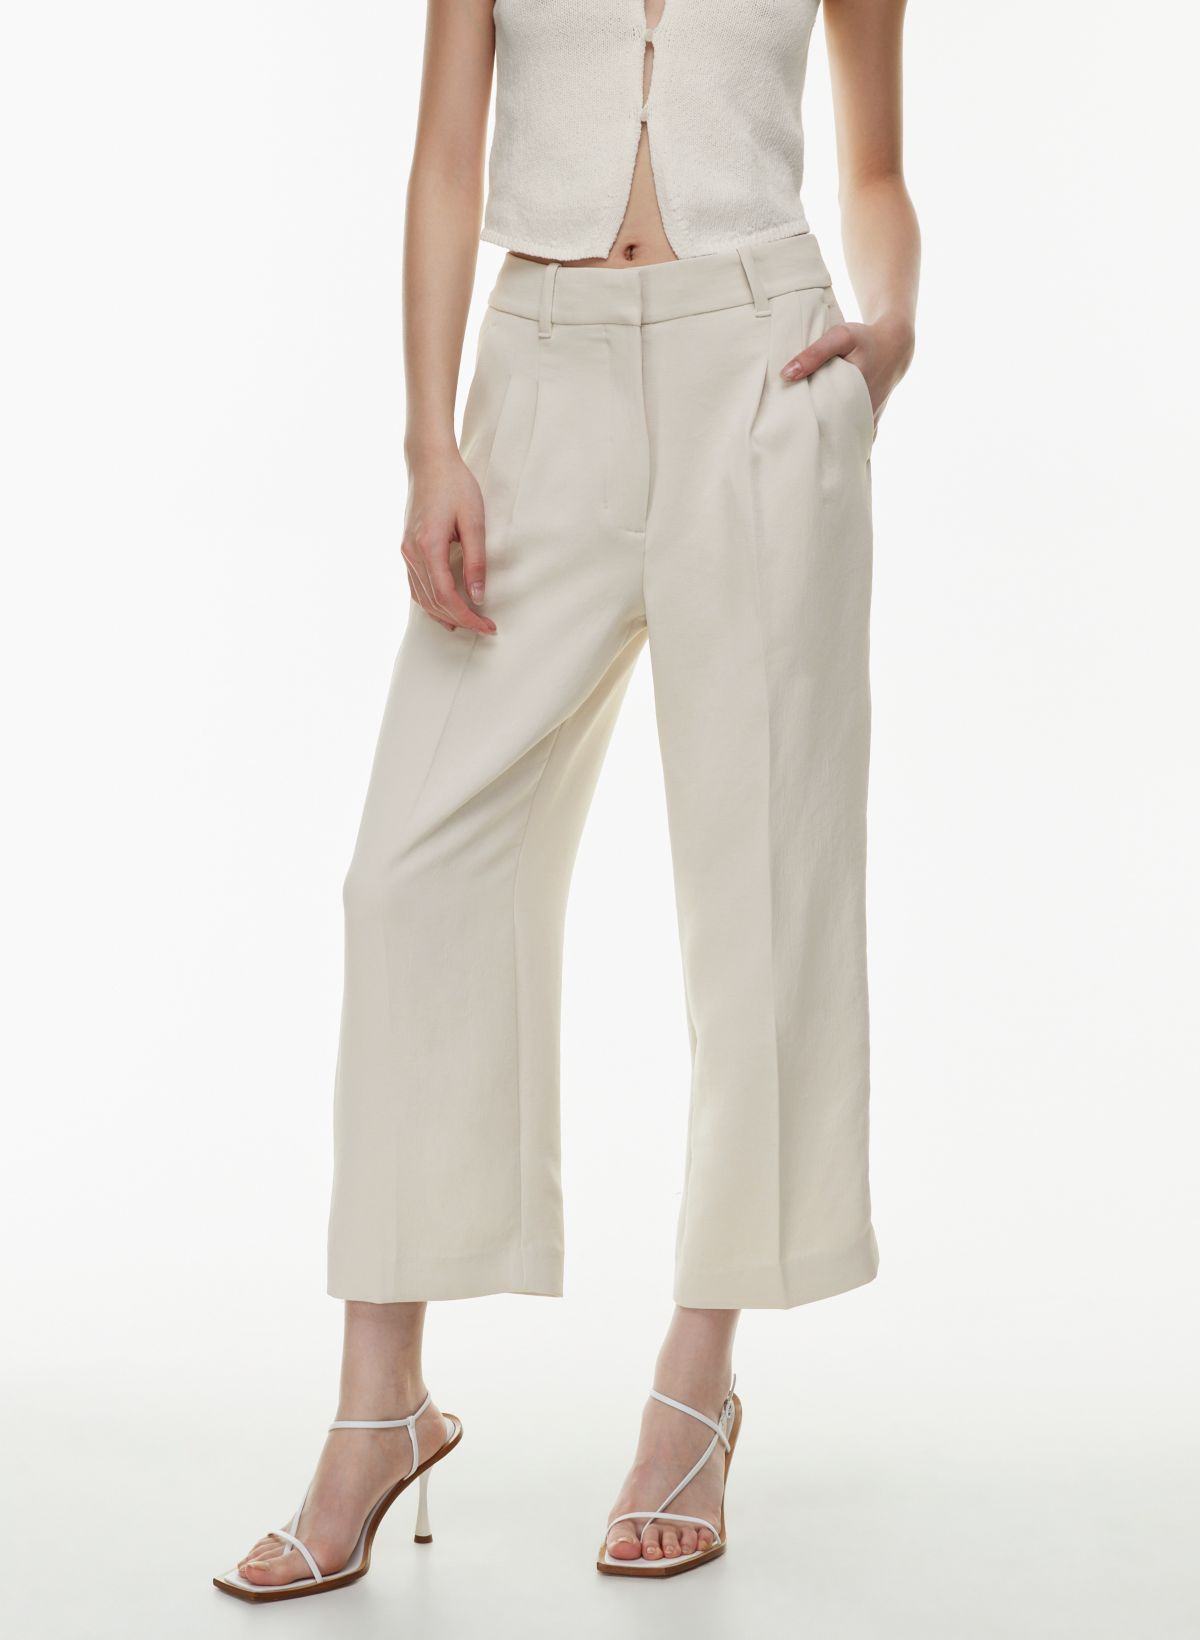 The Perfect Trousers for Petite Women  Zara High-Waisted Pants Review &  Styling - Beautifully Syndie